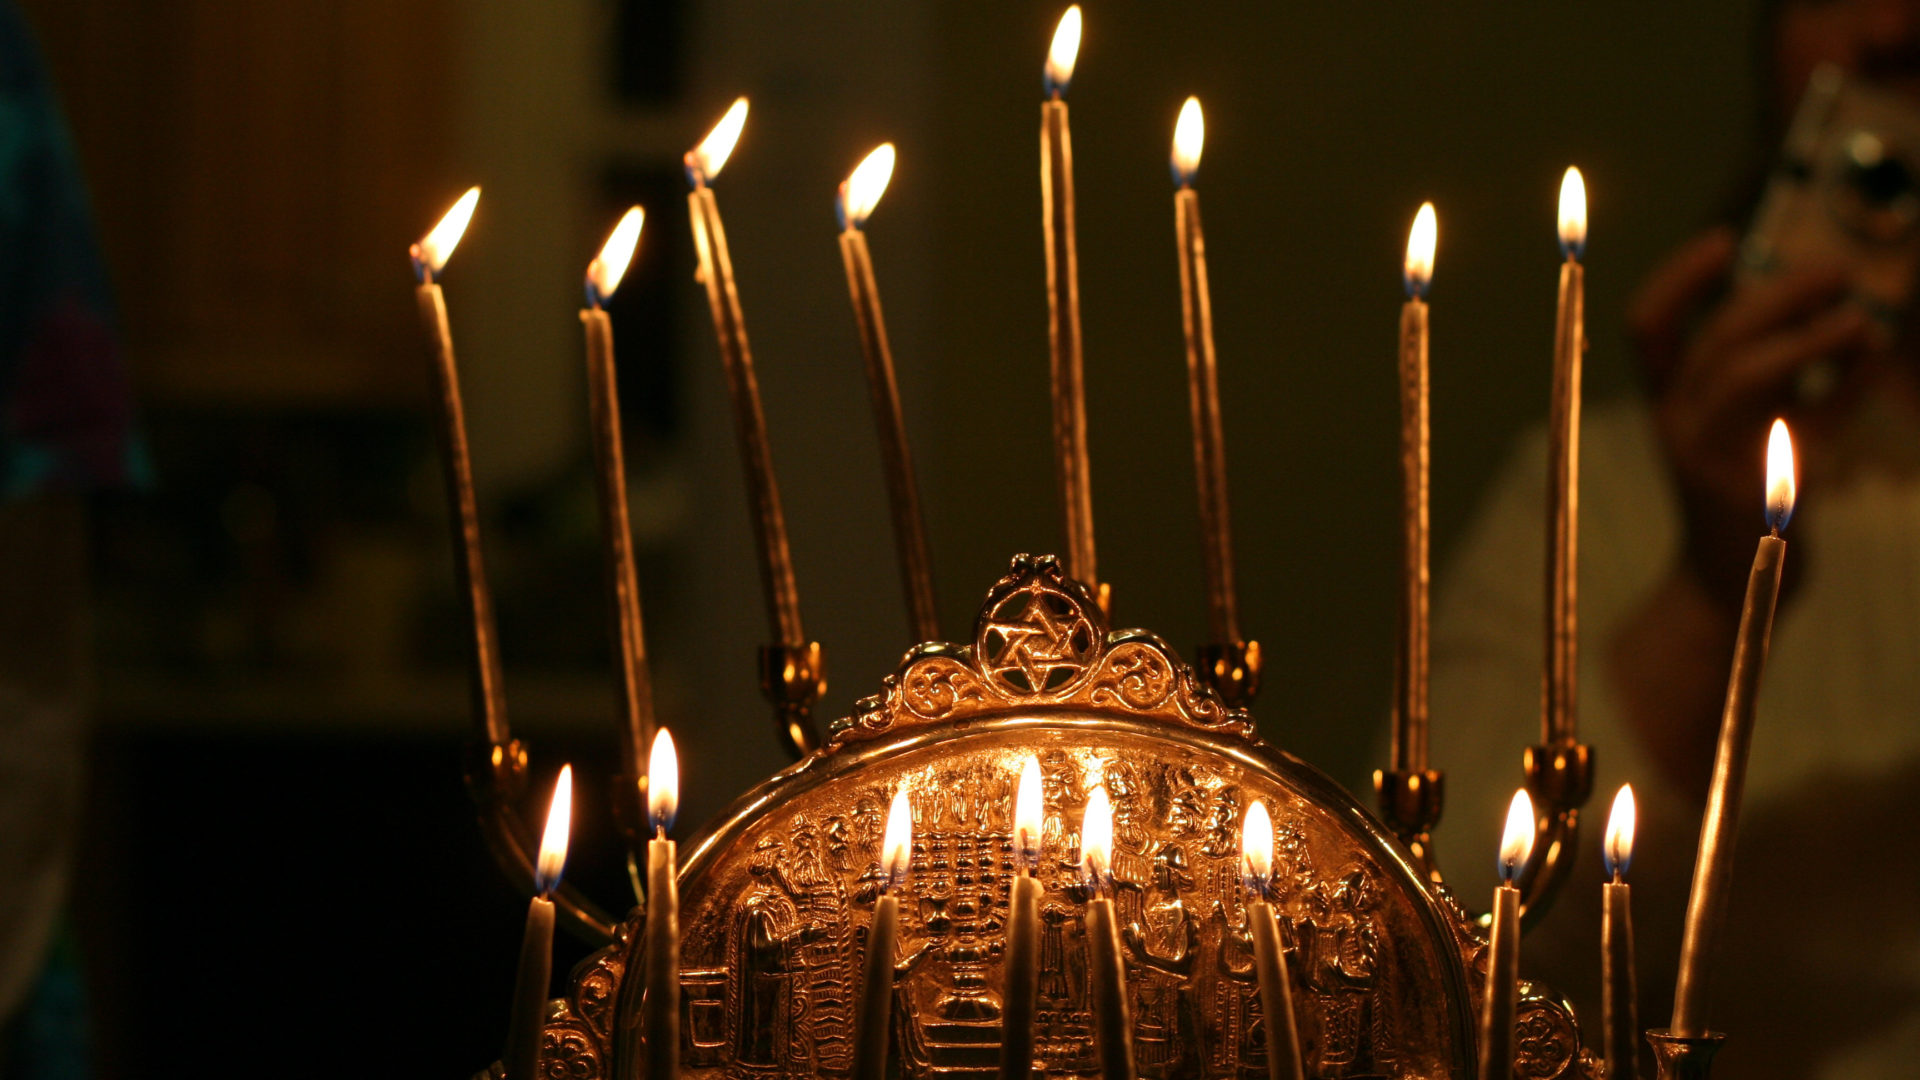 A menorah gleams in shades of copper and bronze in the candlelight. Creative Commons courtesy photo